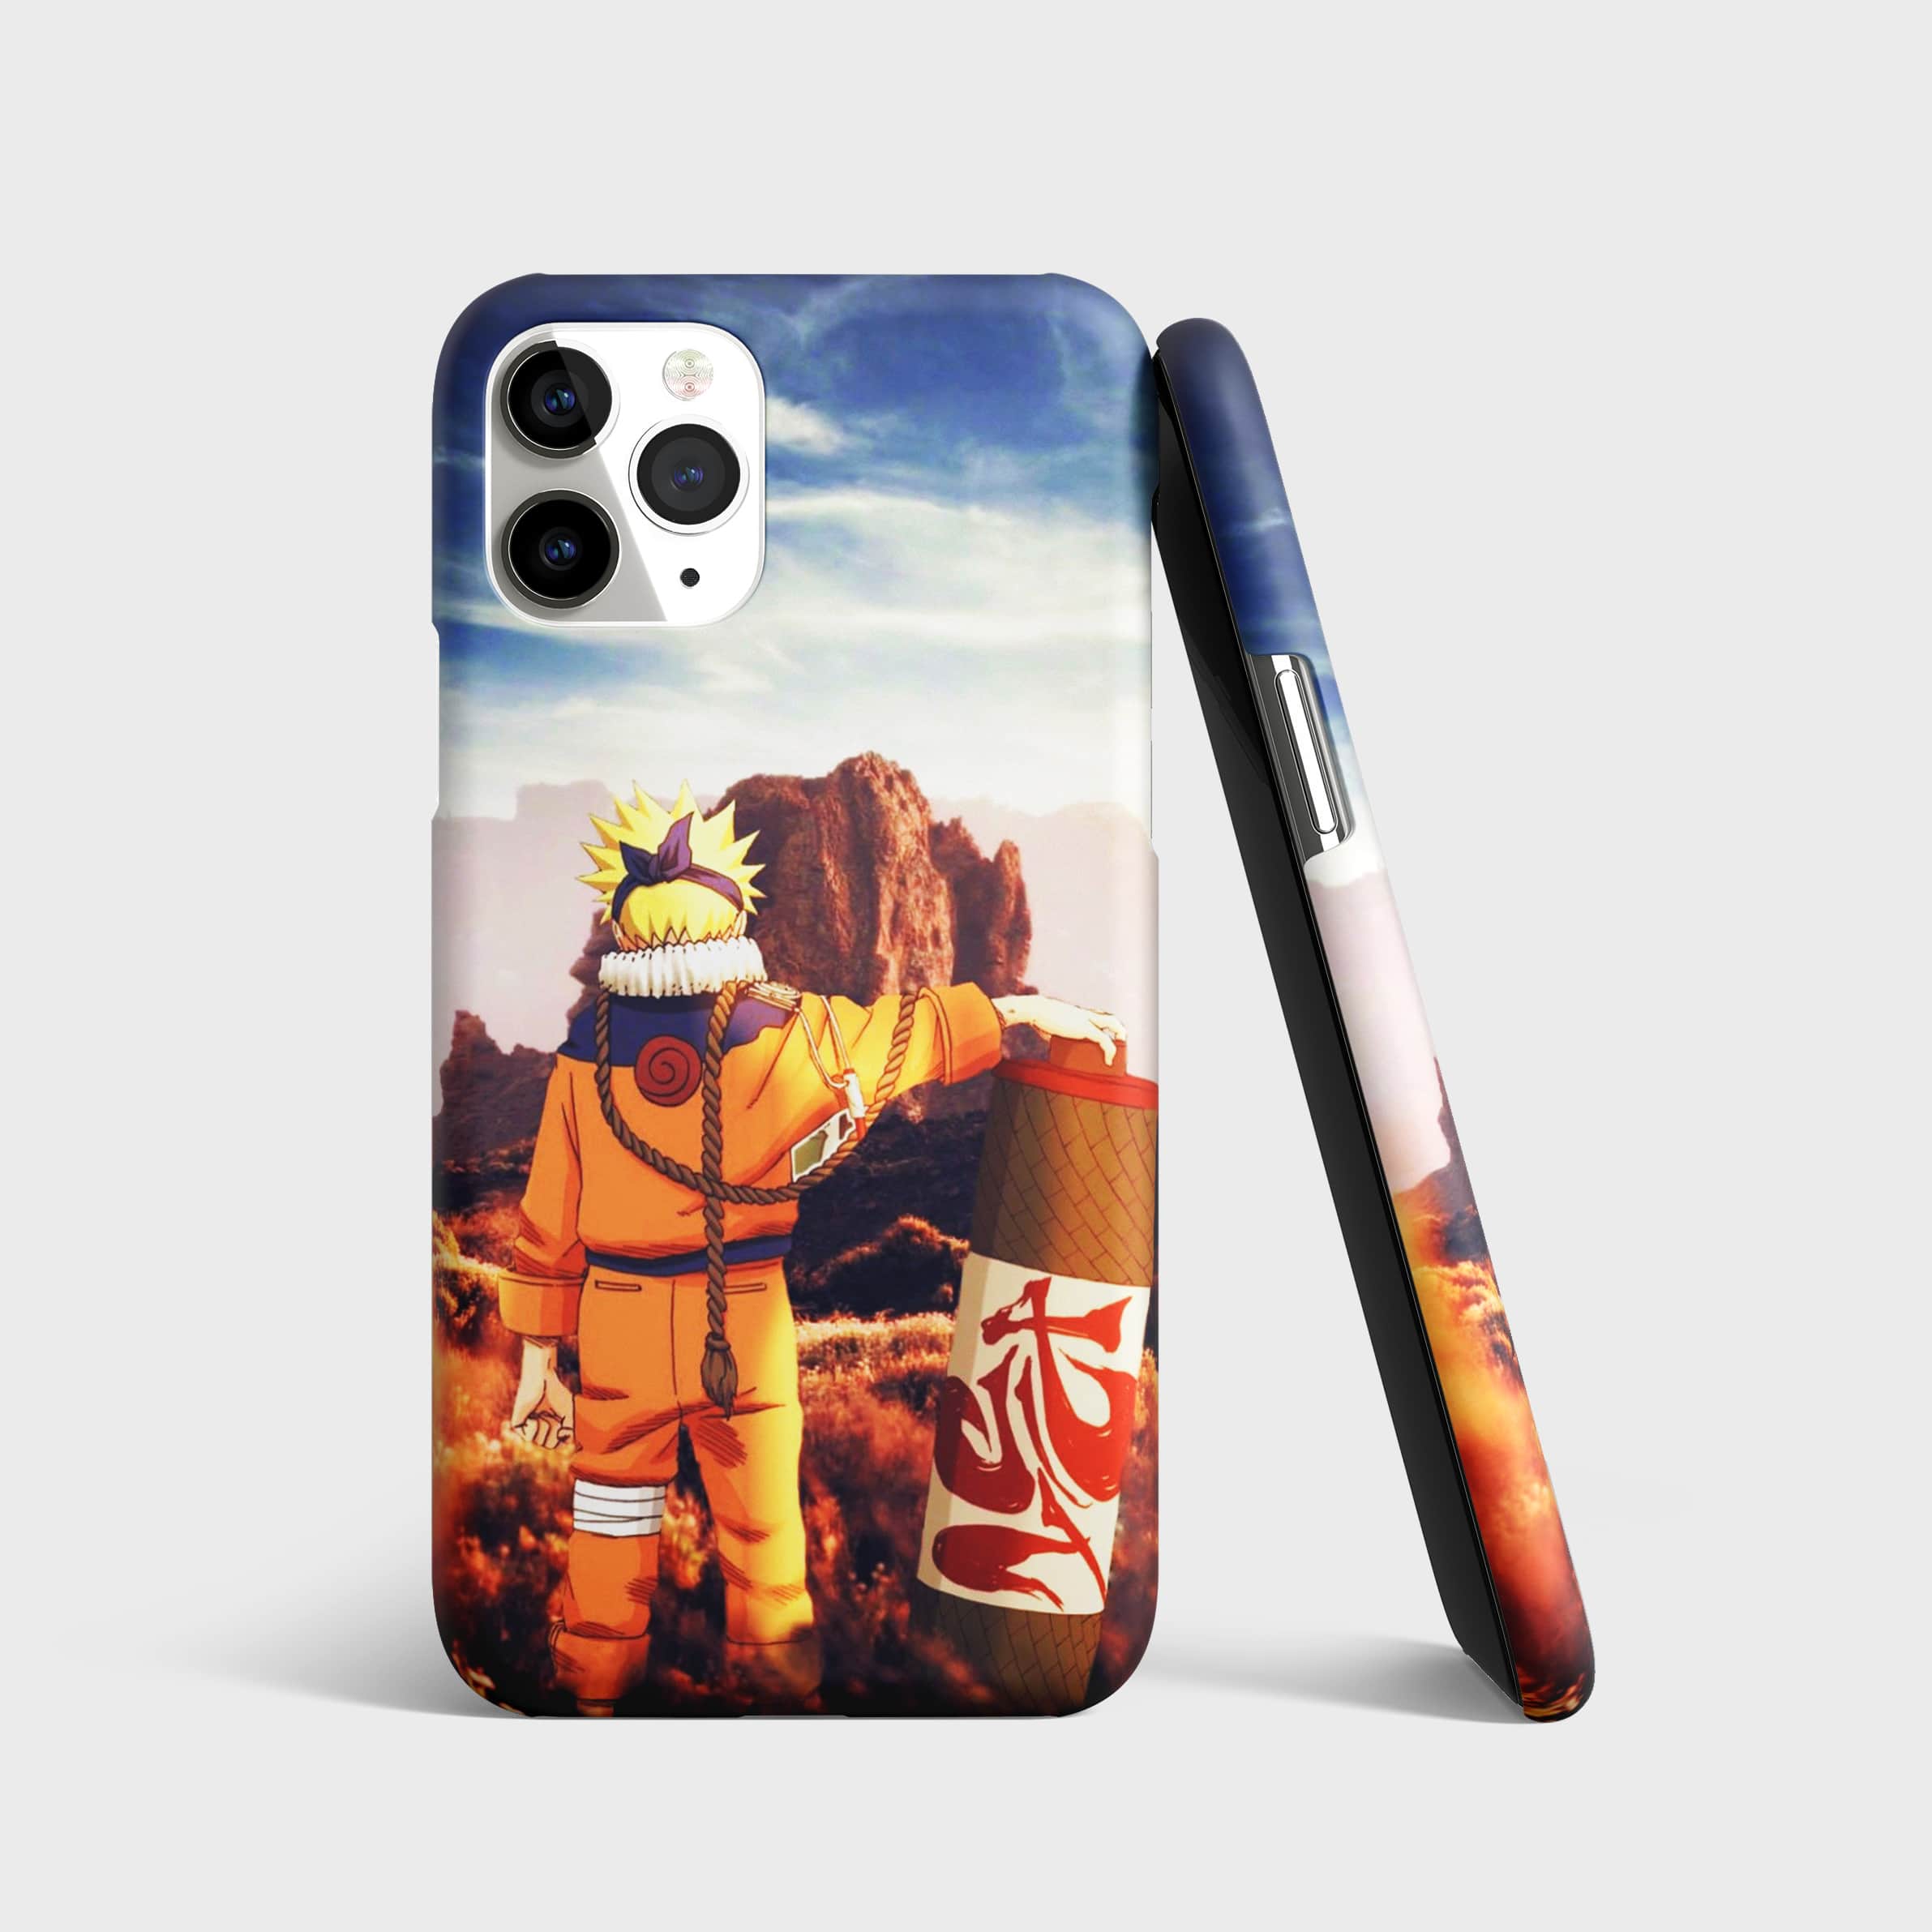 Naruto Scroll Phone Cover with 3D matte finish, featuring iconic scroll design.